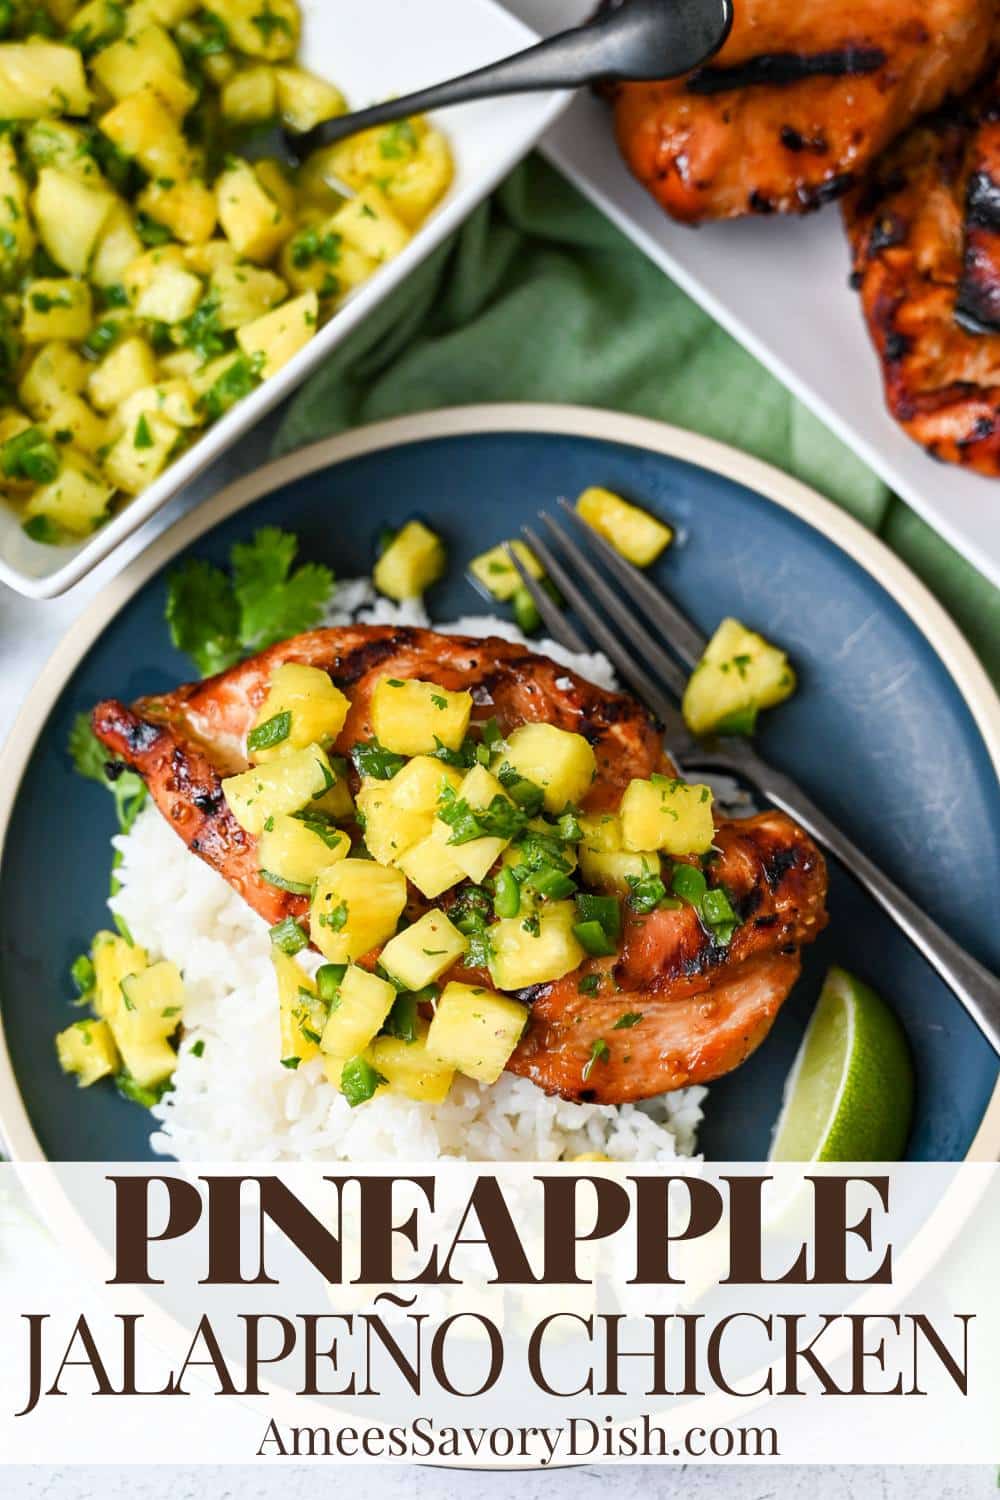 Chicken breasts marinated in teriyaki sauce, grilled and served with spicy-sweet pineapple salsa. A light protein-packed dinner that's easy and delicious! via @Ameessavorydish